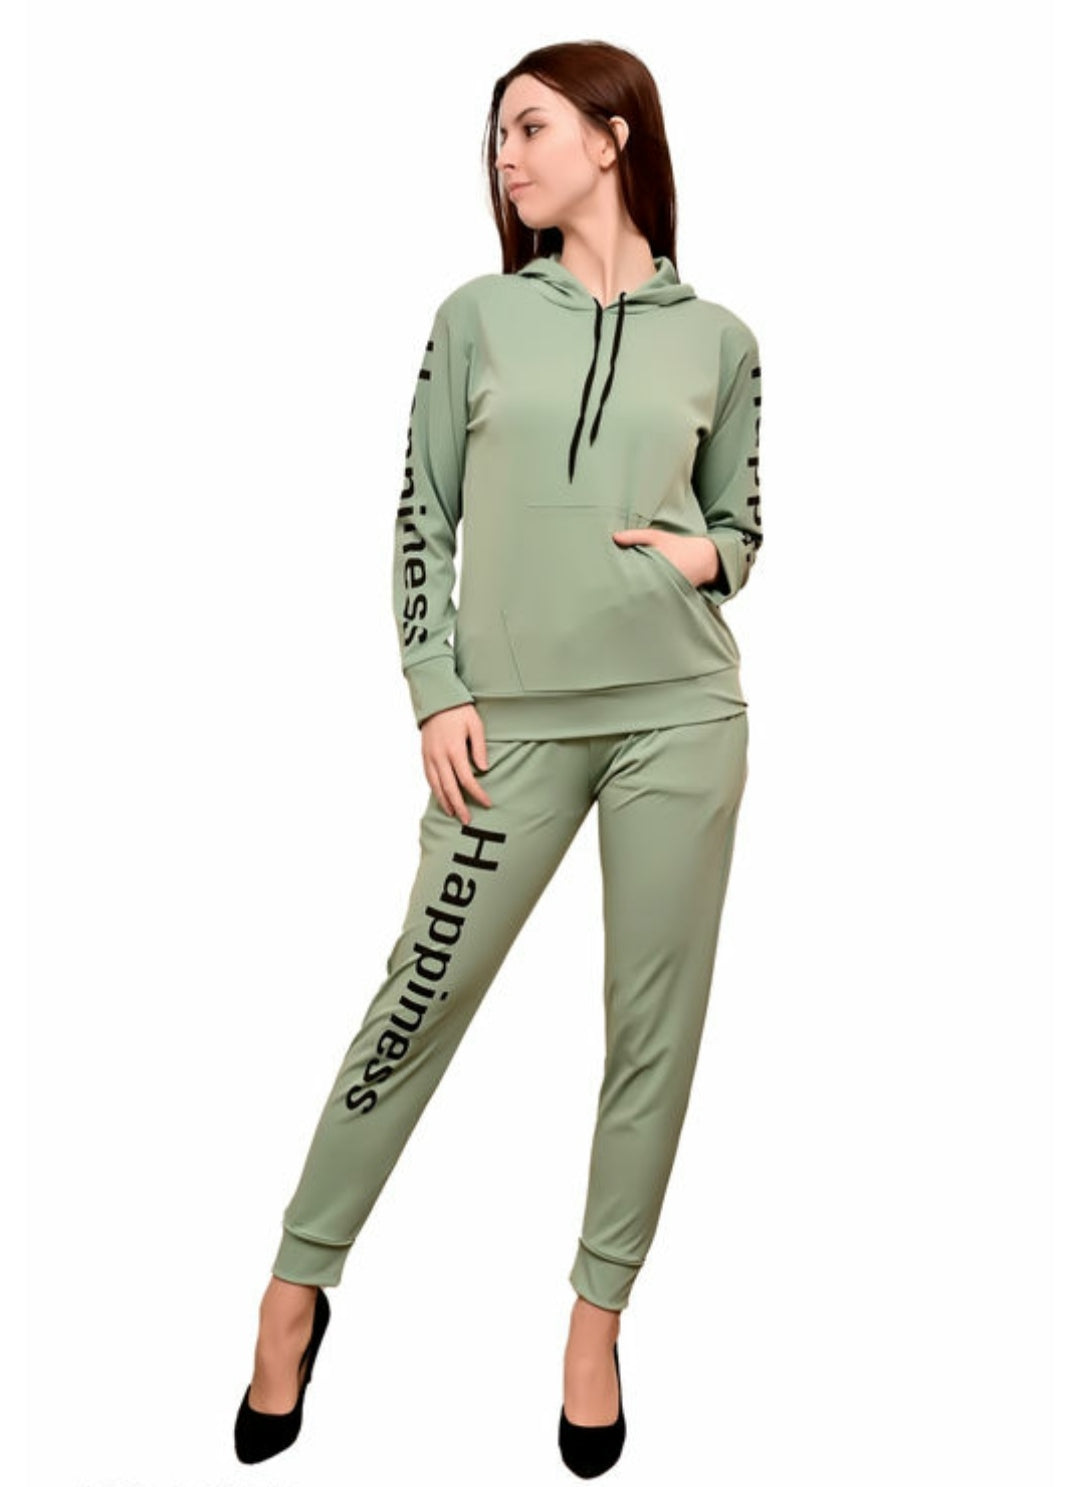 Graceful Women Tracksuit for Hiking & Yoga